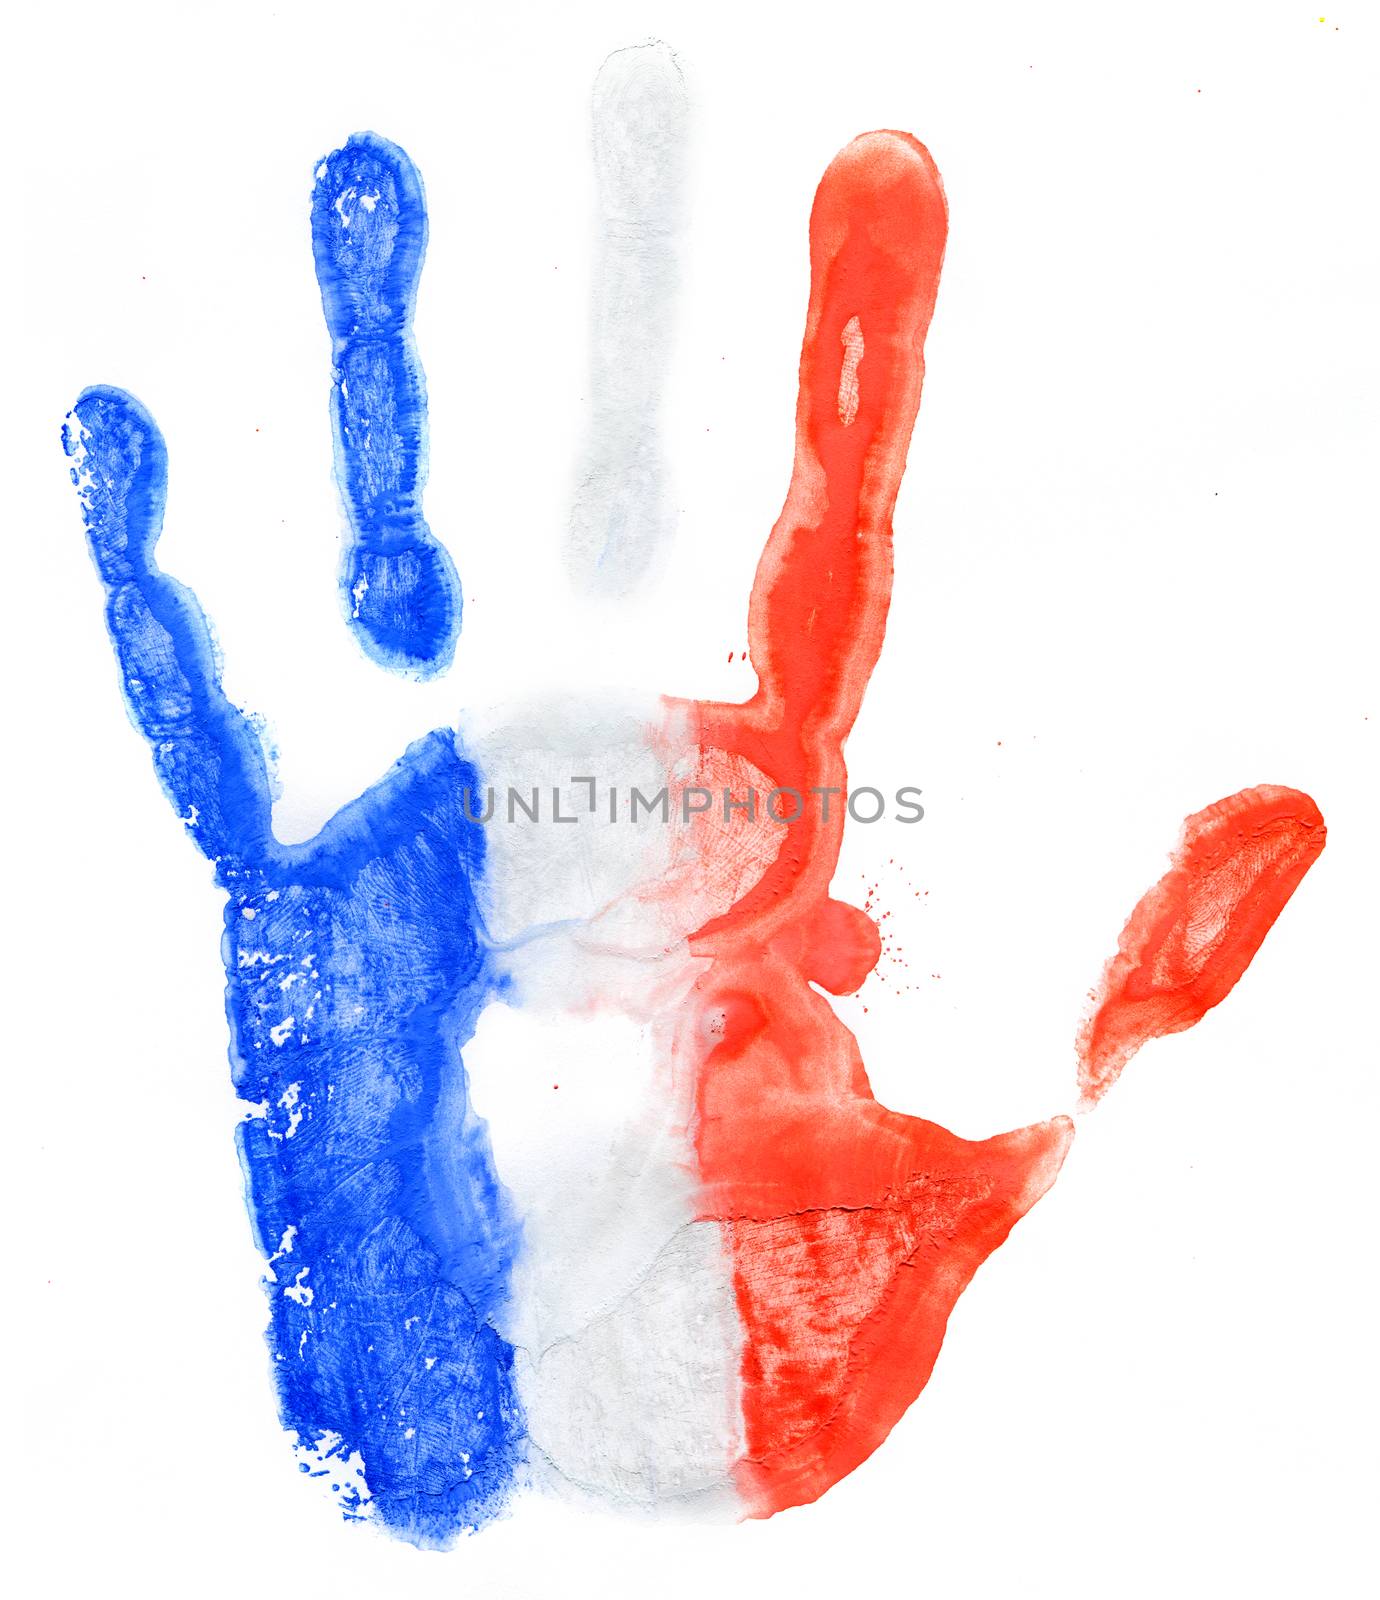 Handprint of a France flag on a white by vlad_star